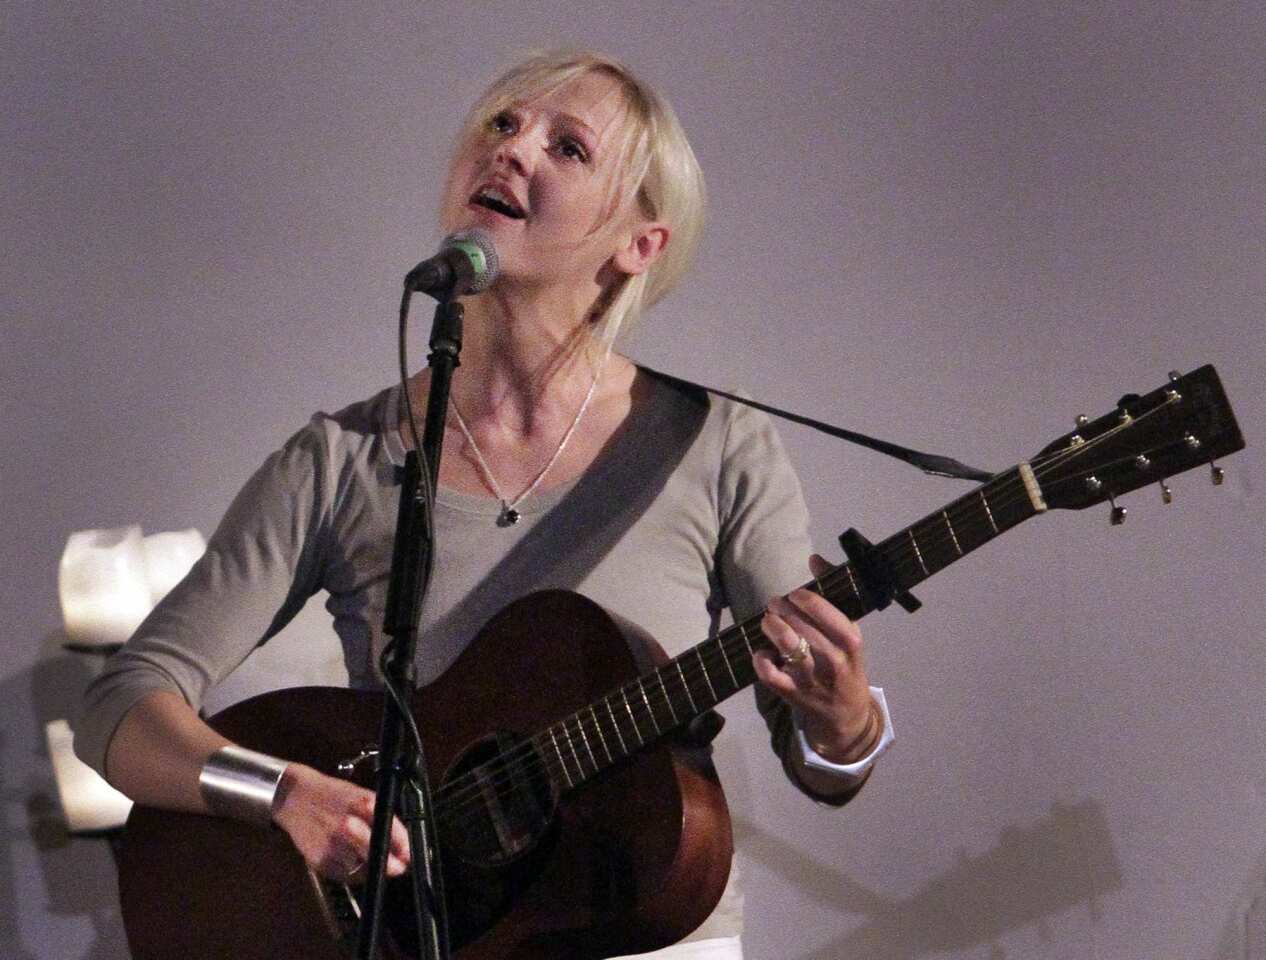 UNDERRATED: Laura Marling's 'A Creature I Don't Know'